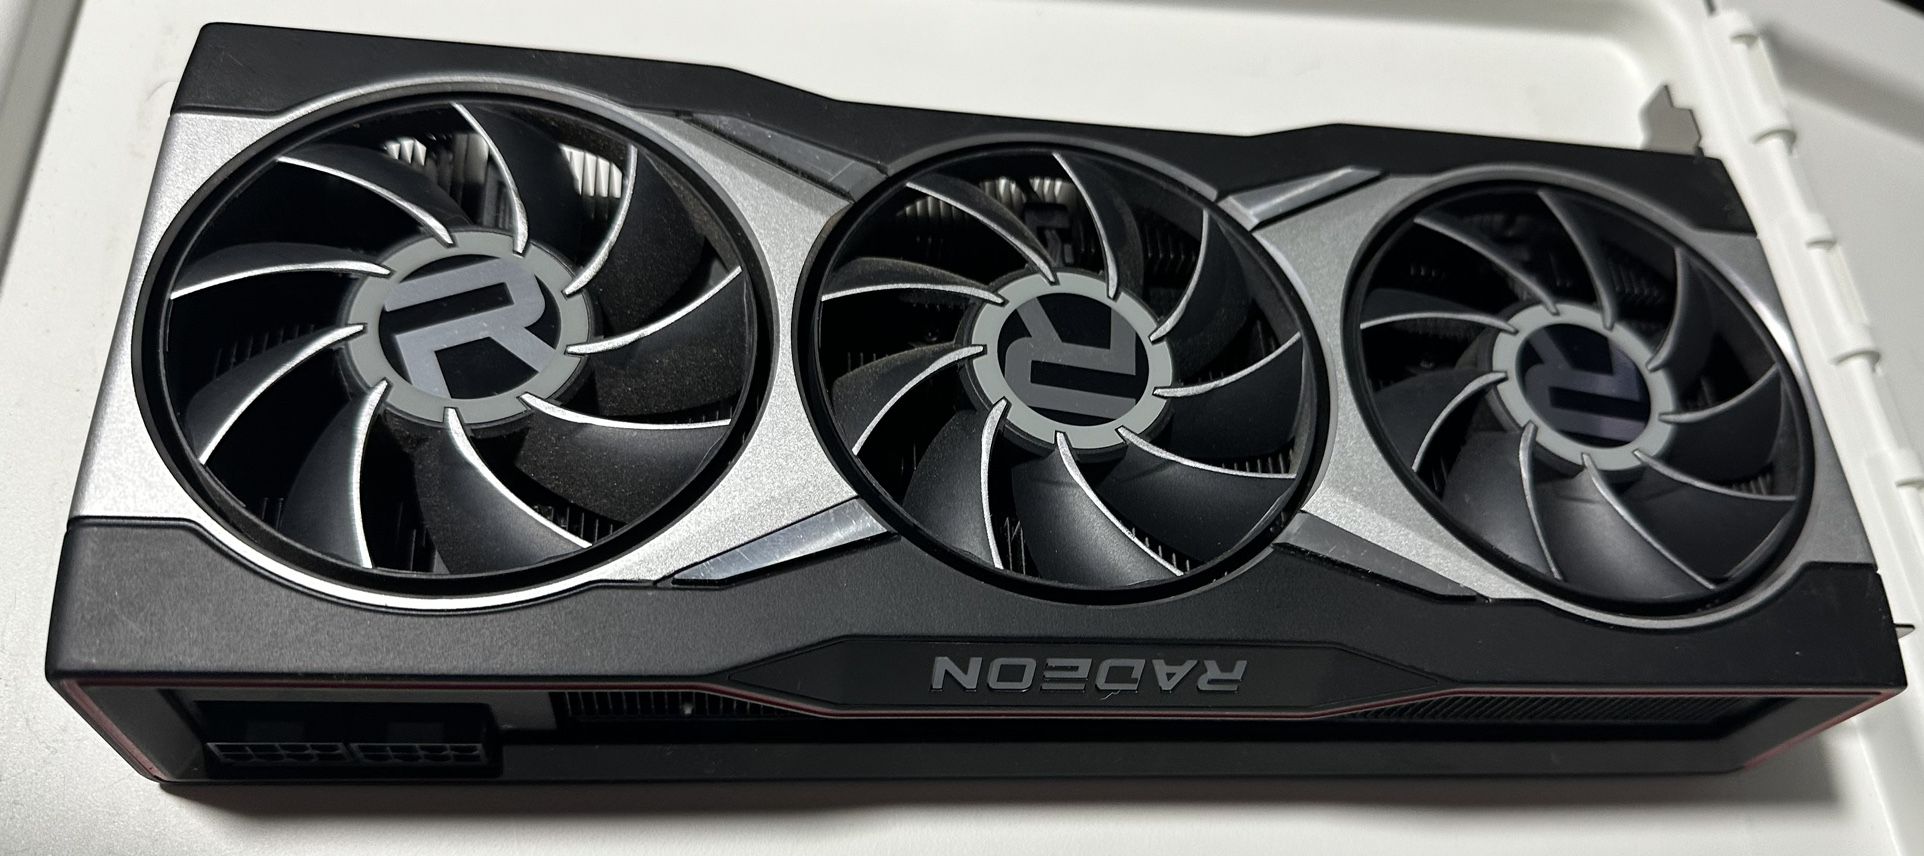 RX6900XT Reference Graphics Card